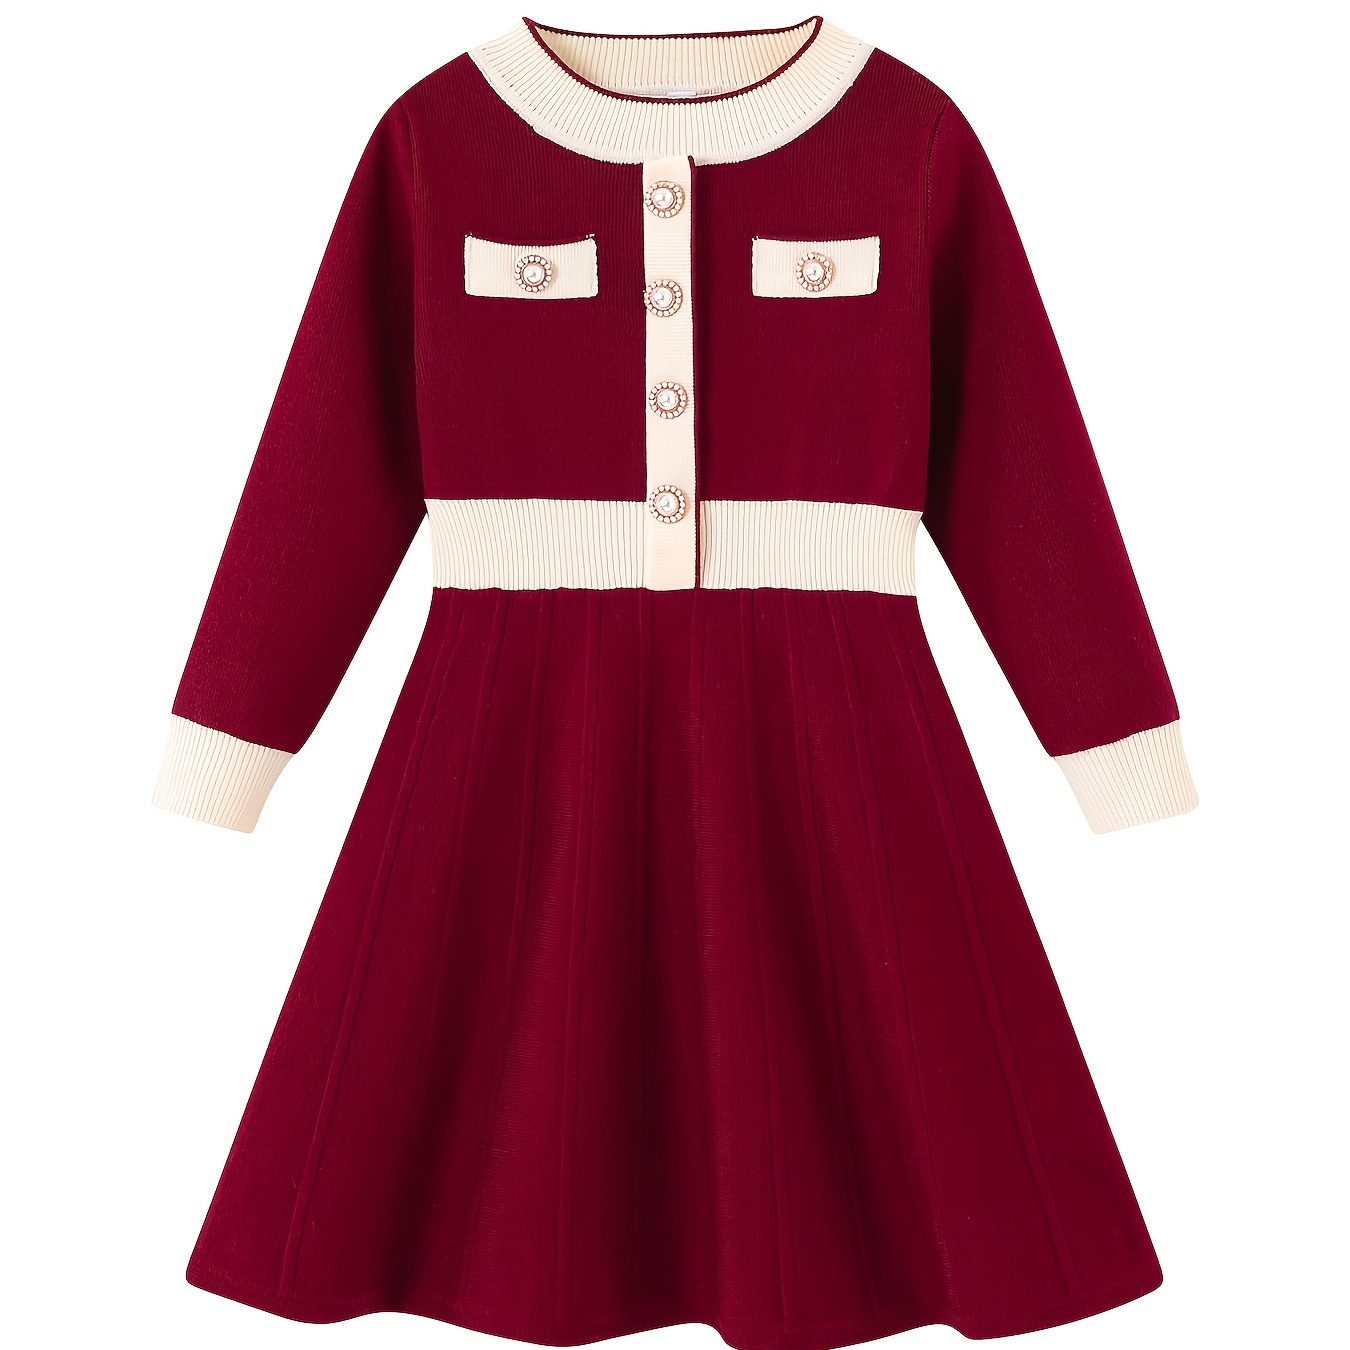 Girls Vintage Casual Knitted Thermal Dress For Winter Christmas Party